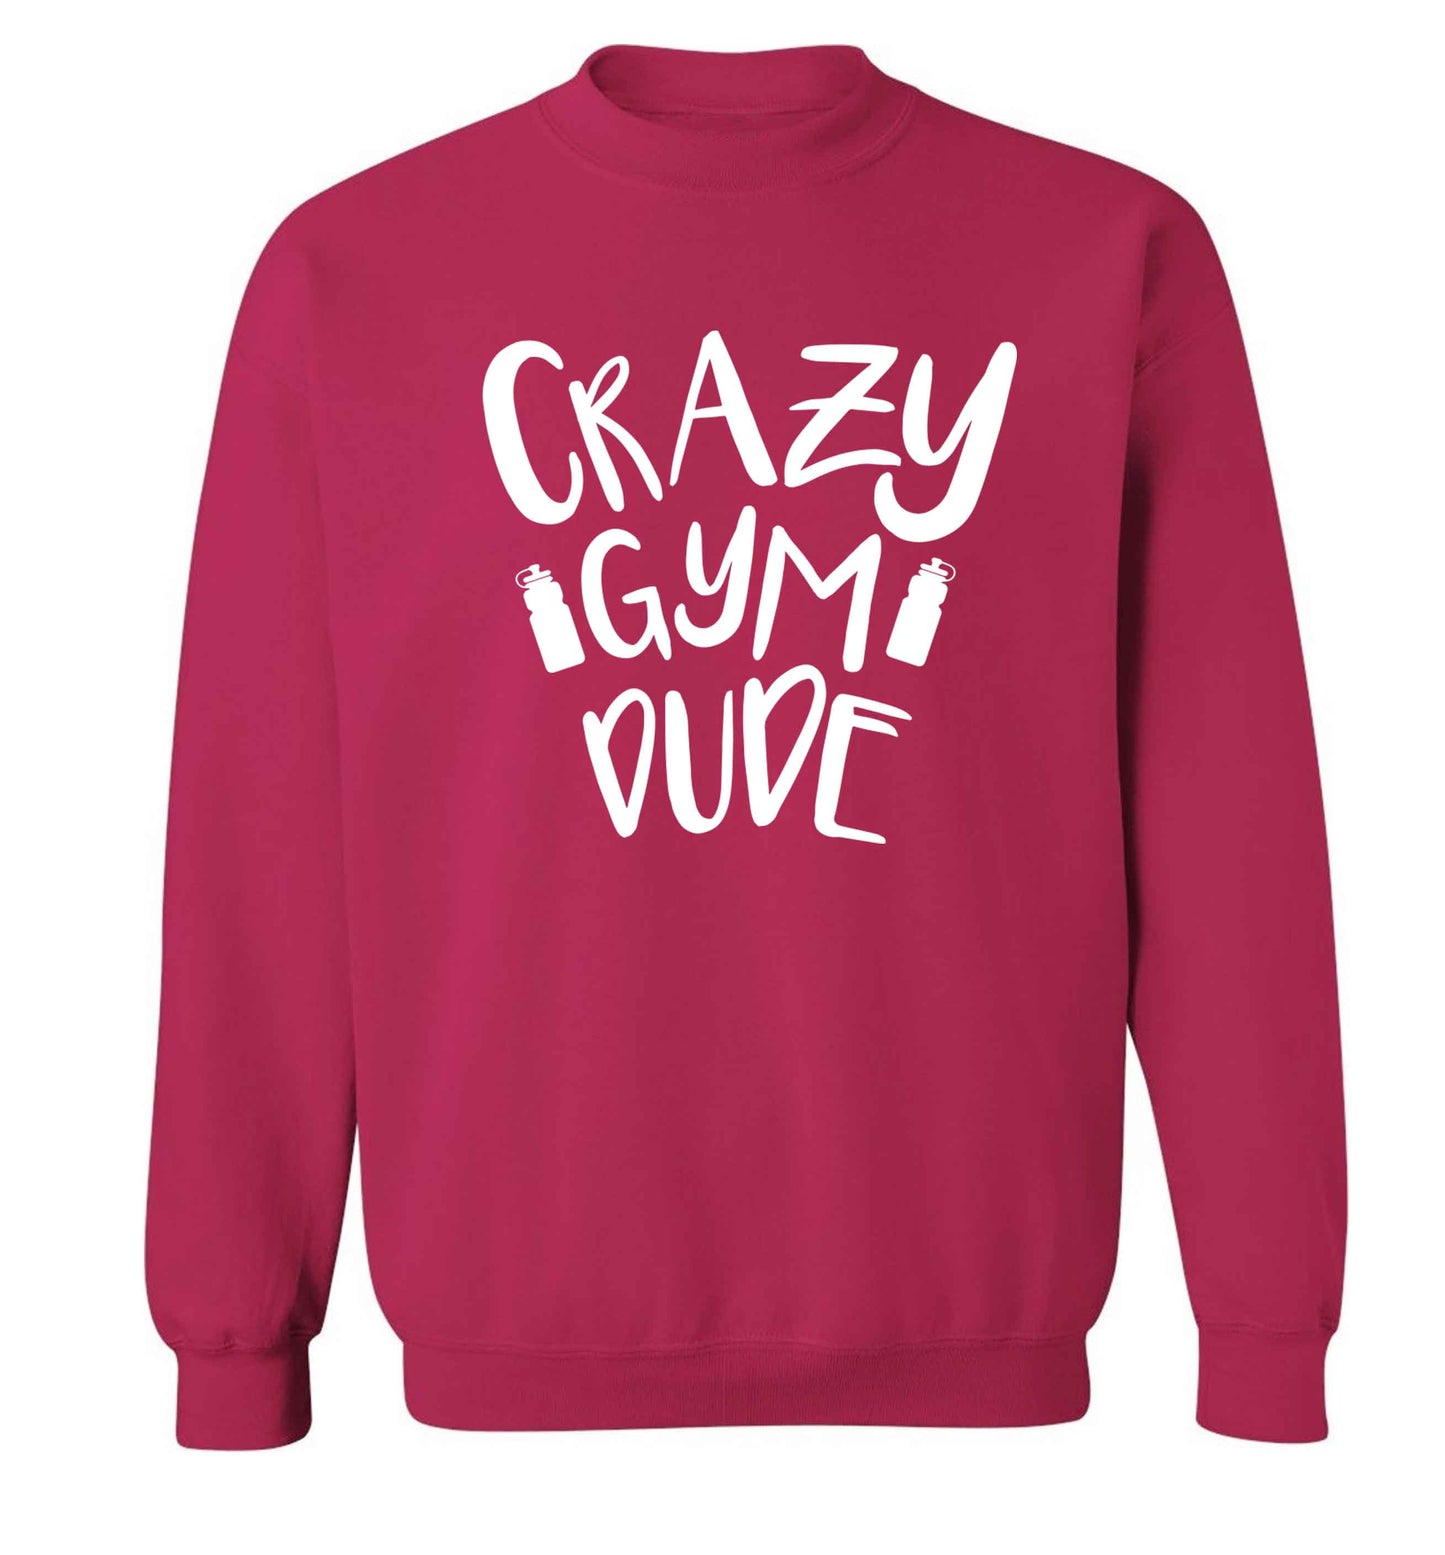 Crazy gym dude Adult's unisex pink Sweater 2XL